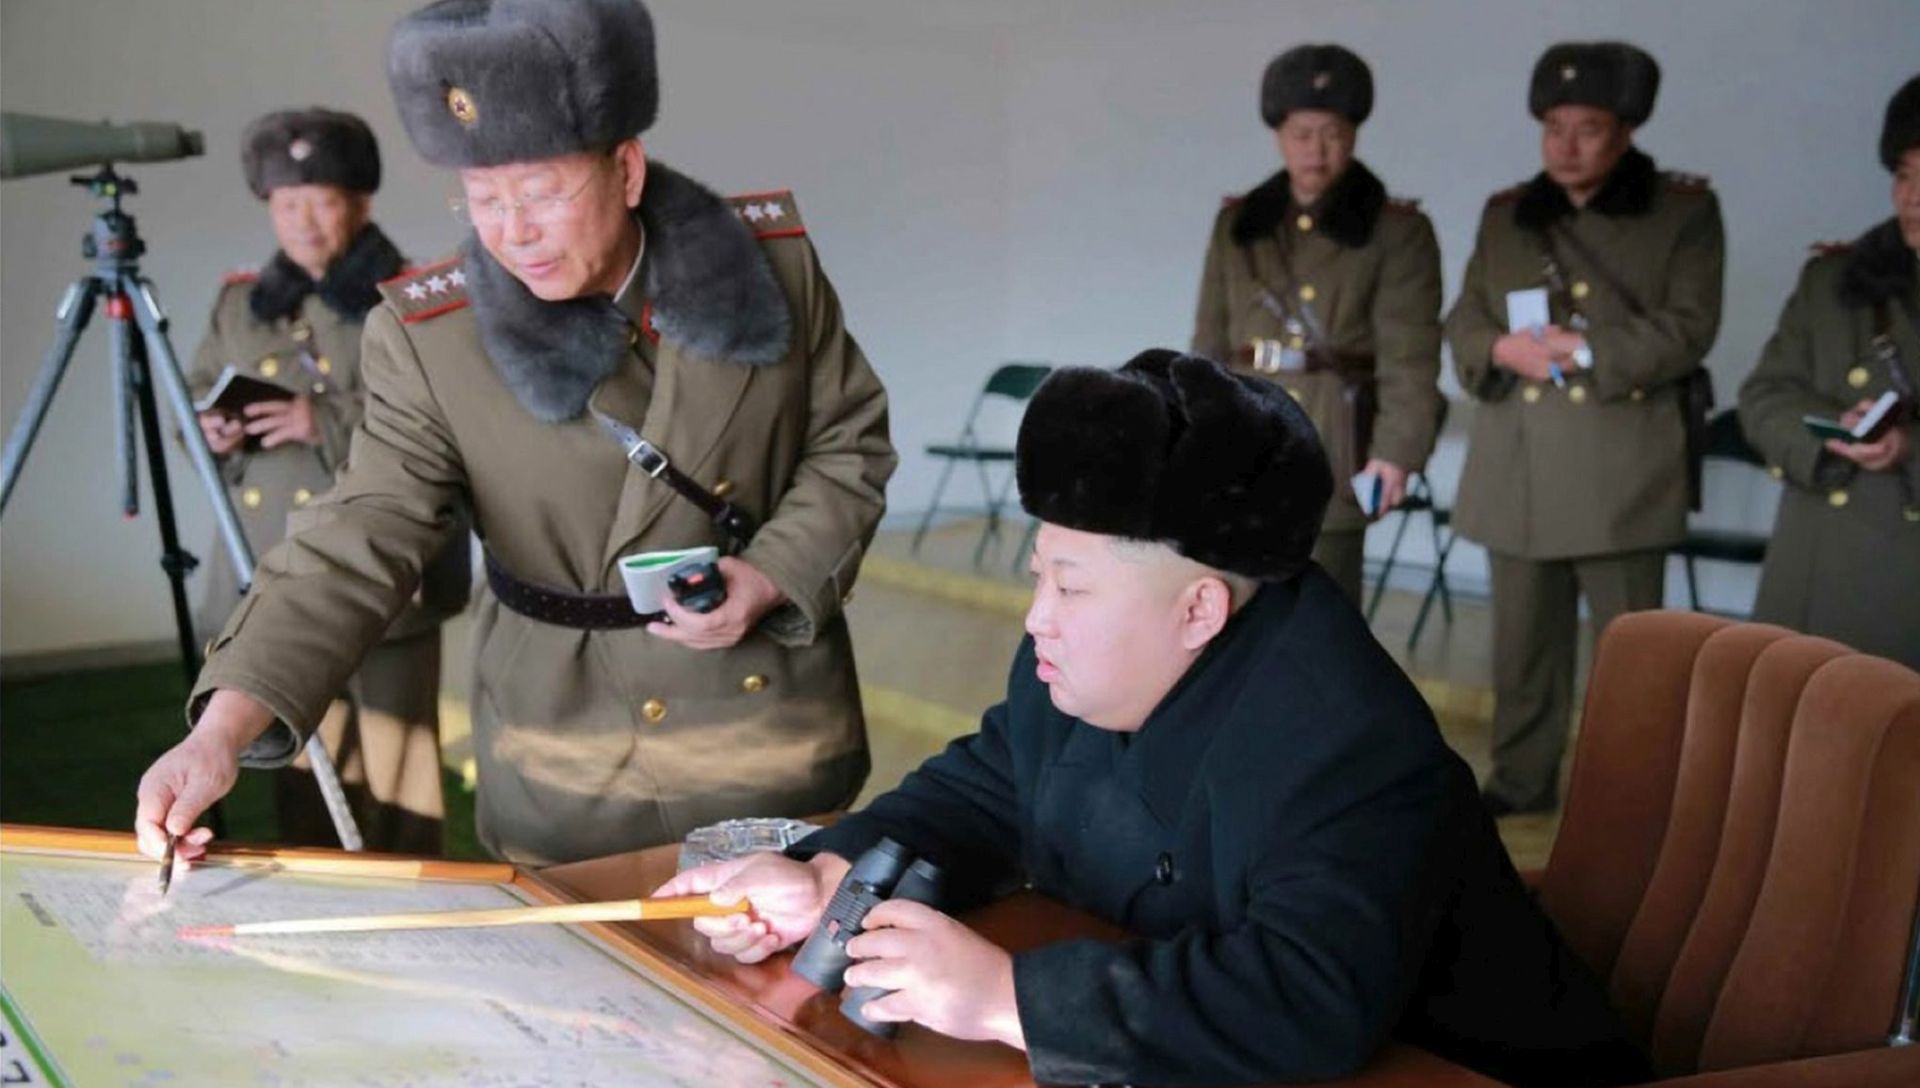 epa05079721 An undated picture released by the Rodong Sinmun, North Korea's ruling Workers' Party newspaper, on 24 December 2015 shows North Korean leader Kim Jong-un (C) talking with a senior official of the North Korean People's Army during his inspection of actual maneuvers between the Army's large combined units 526 and 671 at an uknown location, North Korea. According to the North's state-run newspaper, Kim was quoted as saying 'Practical drills should be conducted so often to cope with the hardest and severest war.'  EPA/RODONG SINMUN -- BEST QUALITY AVAILABLE -- SOUTH KOREA OUT